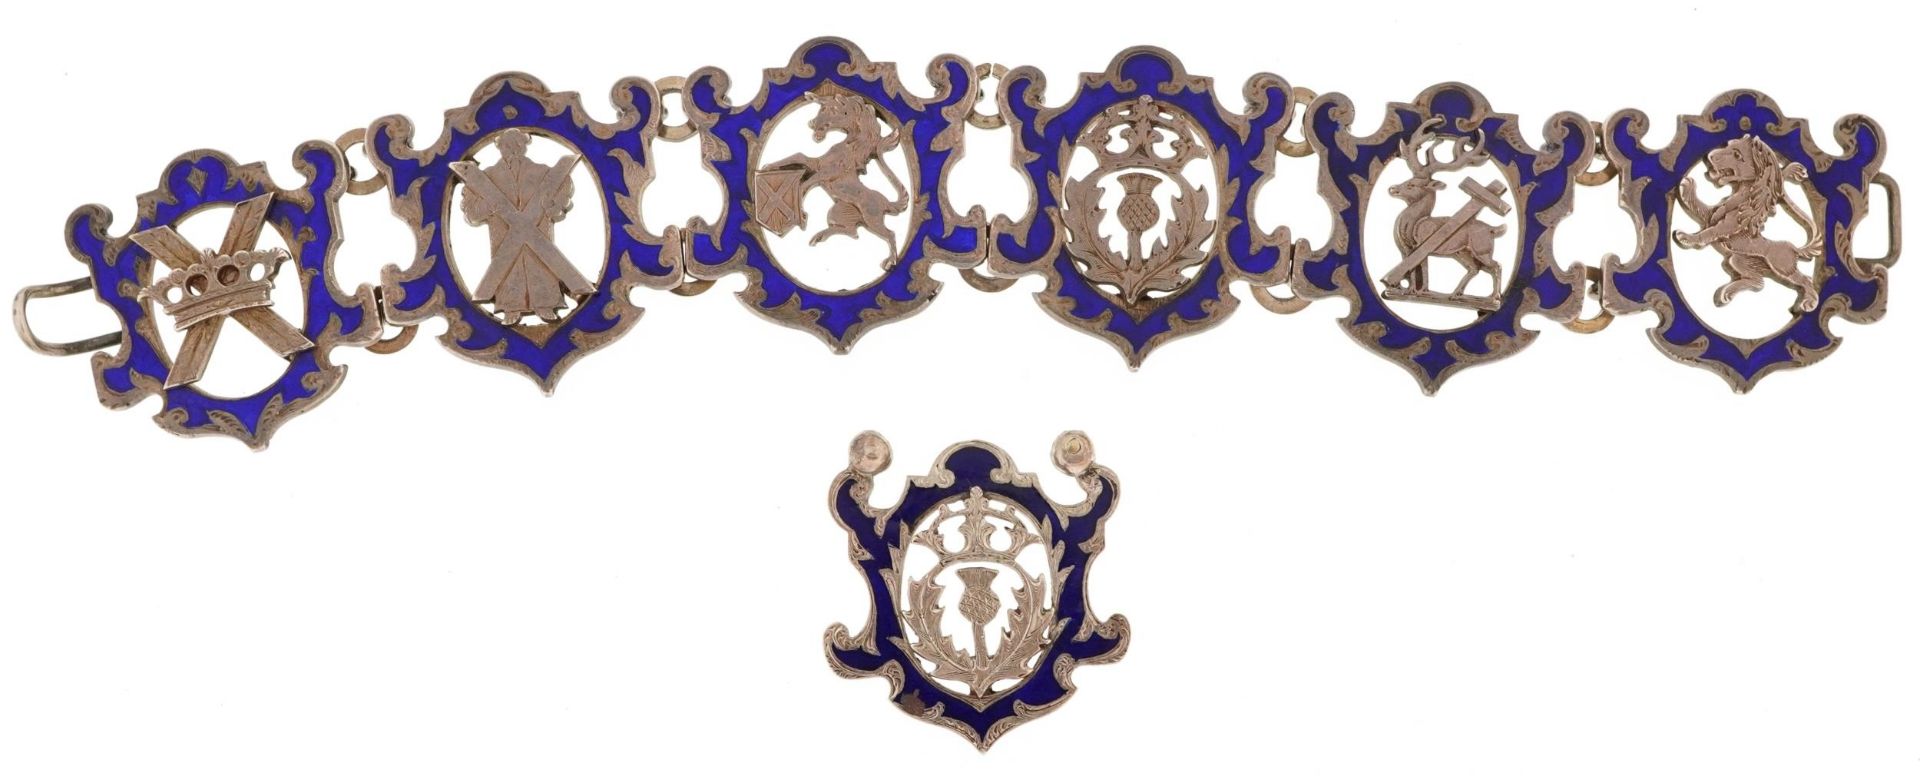 Scottish unmarked silver and blue enamel panelled bracelet decorated with thistle and Scottish Order - Image 2 of 3